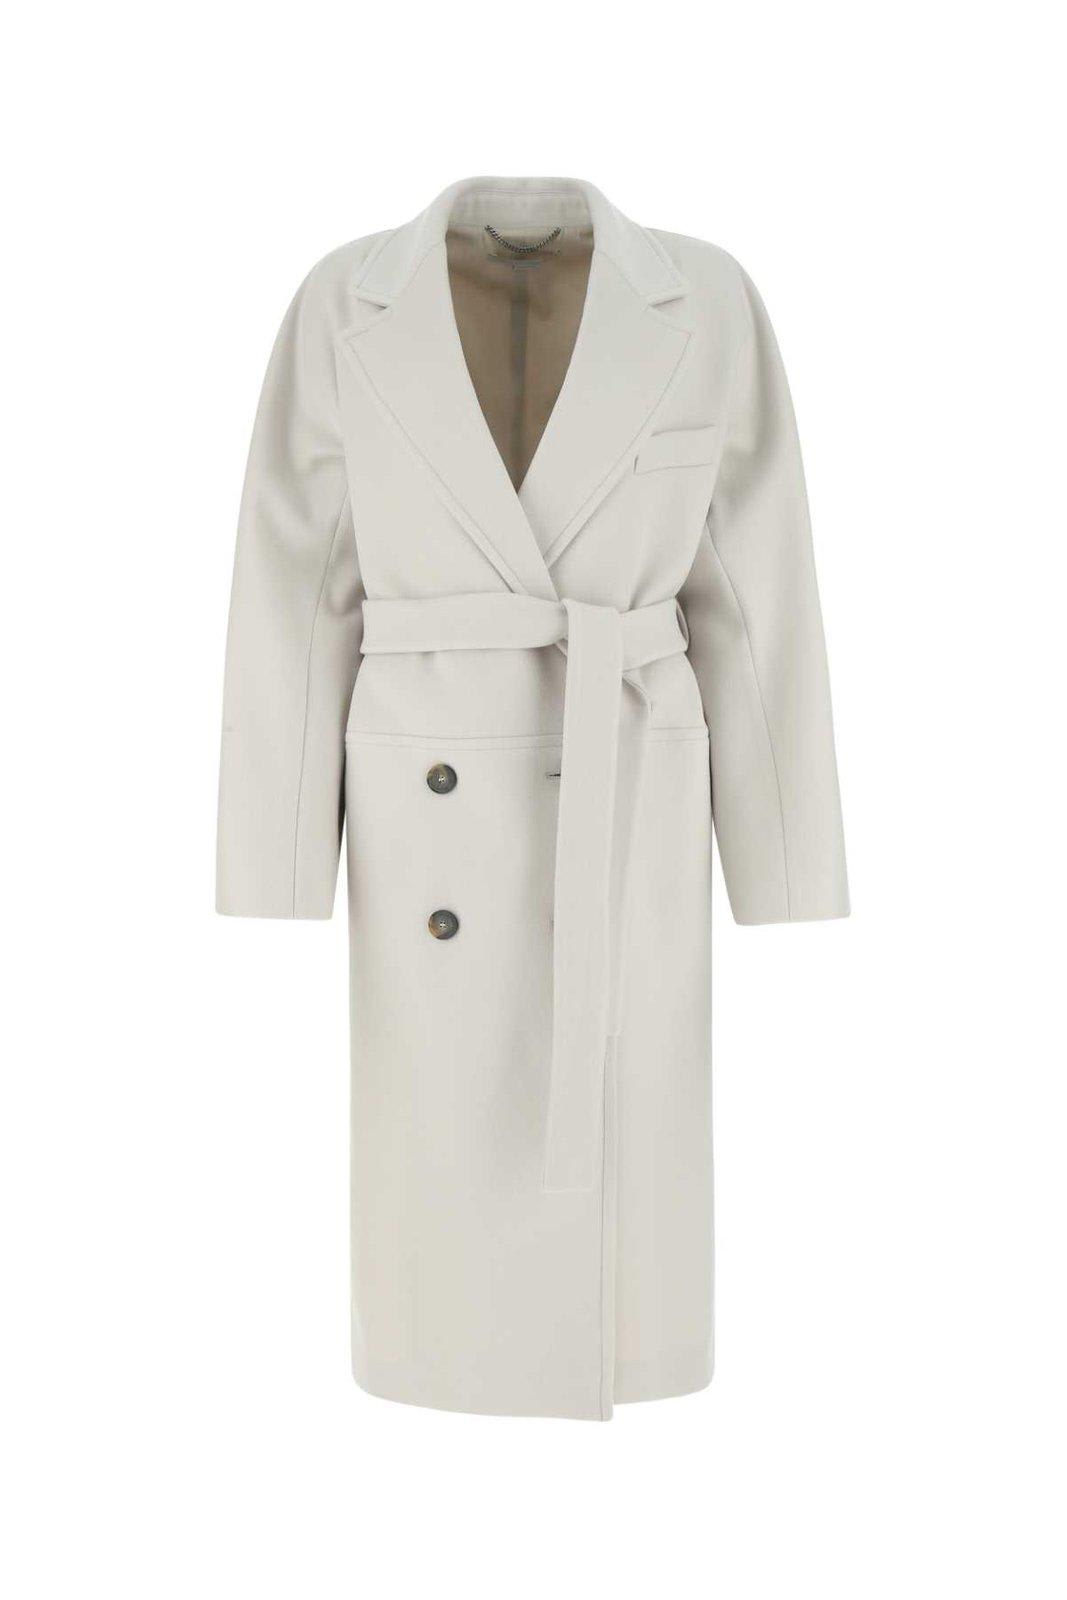 Stella McCartney Double-breasted Long-sleeved Coat